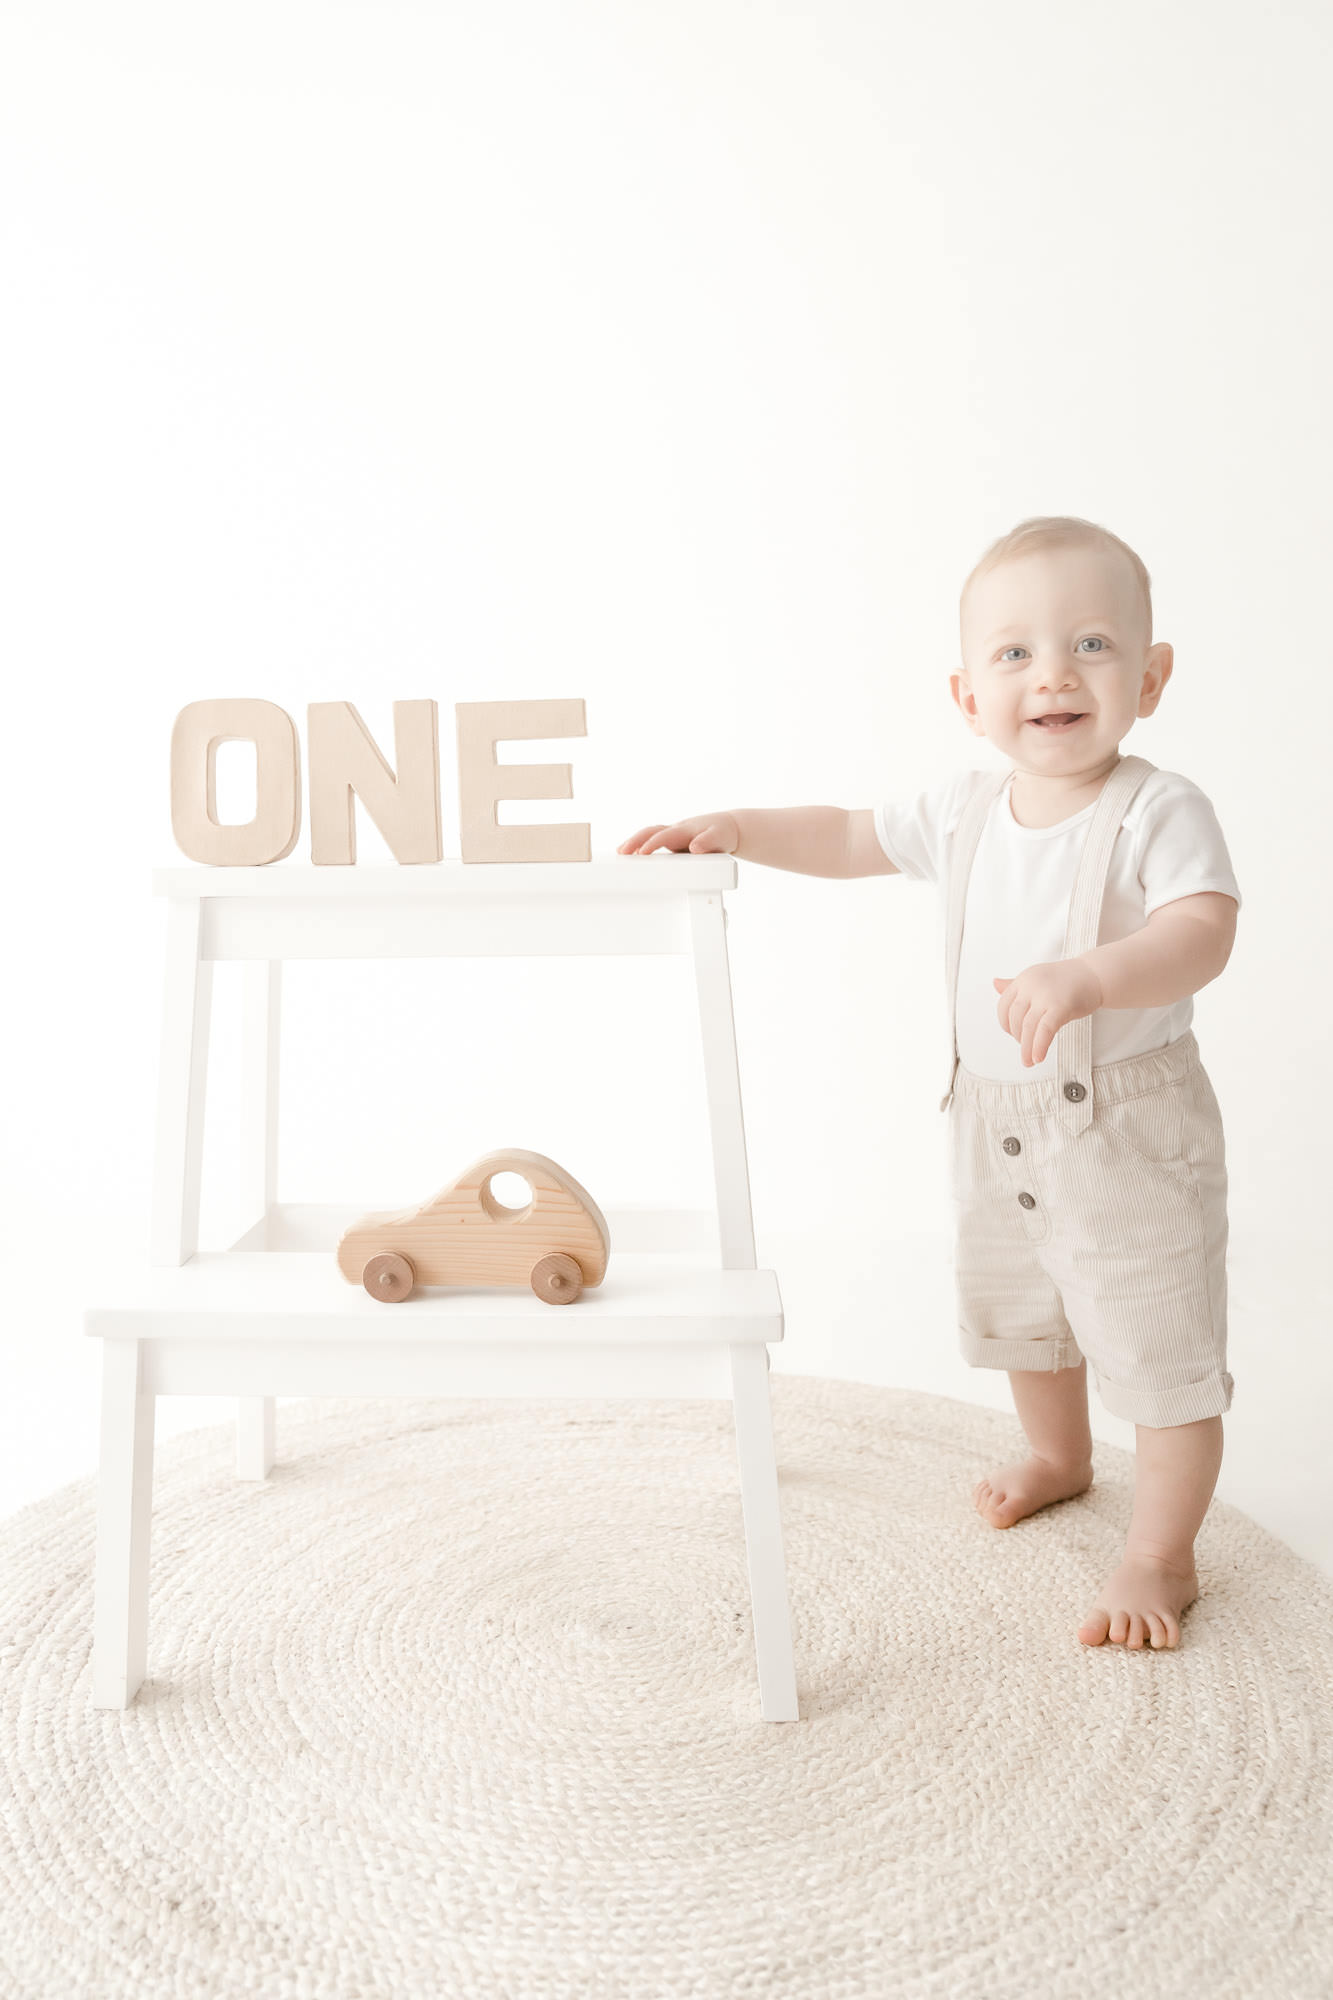 Baby standing for first birthday cake smash portrait photography at Colchester studio